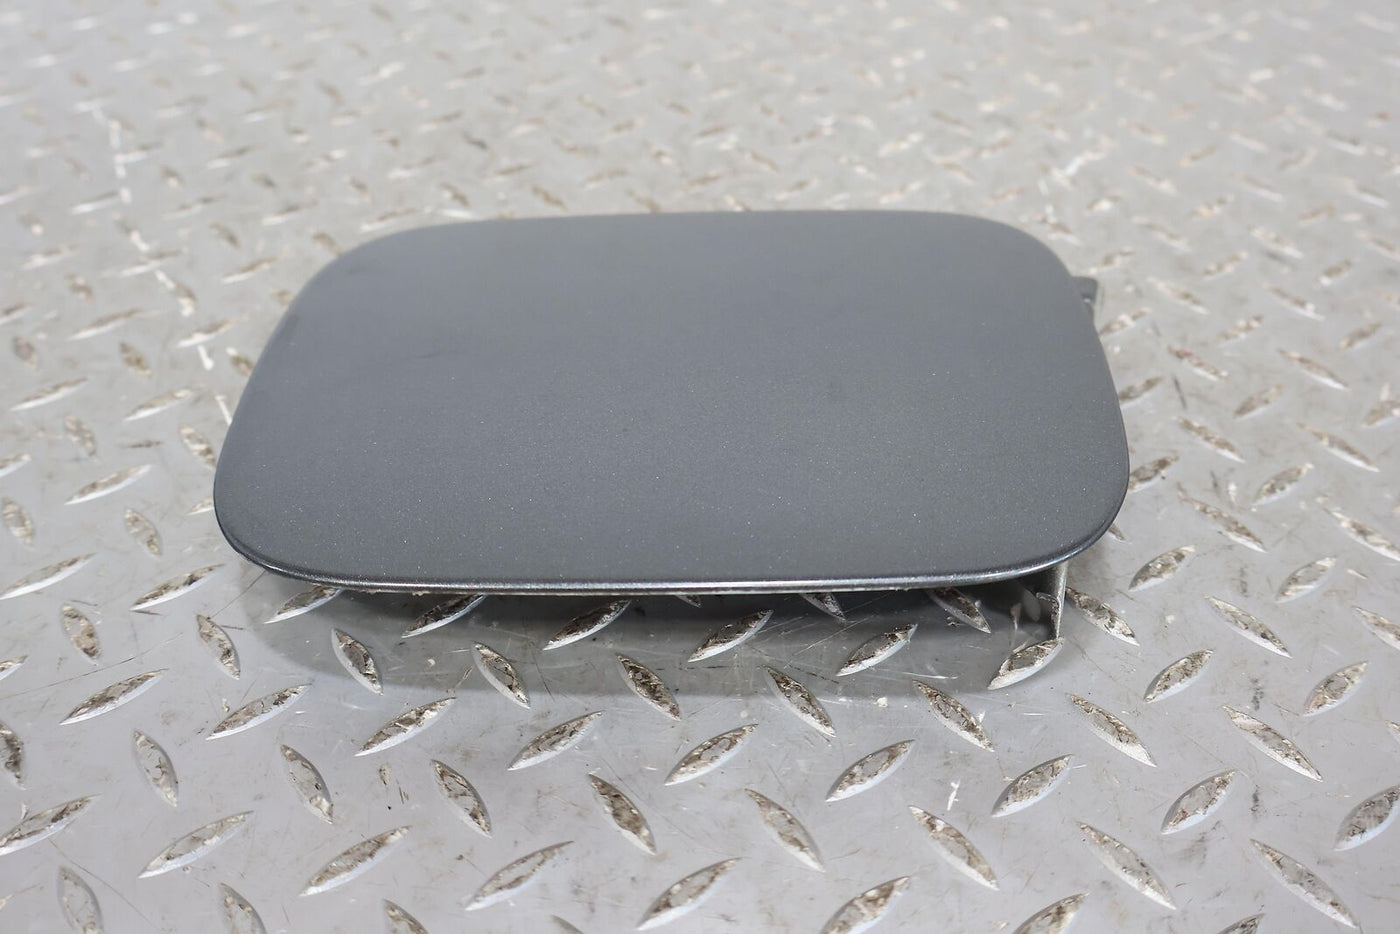 03-04 Audi RS6 Fuel Gas Filler Door Cover (Daytona Gray LZ7S) See Notes